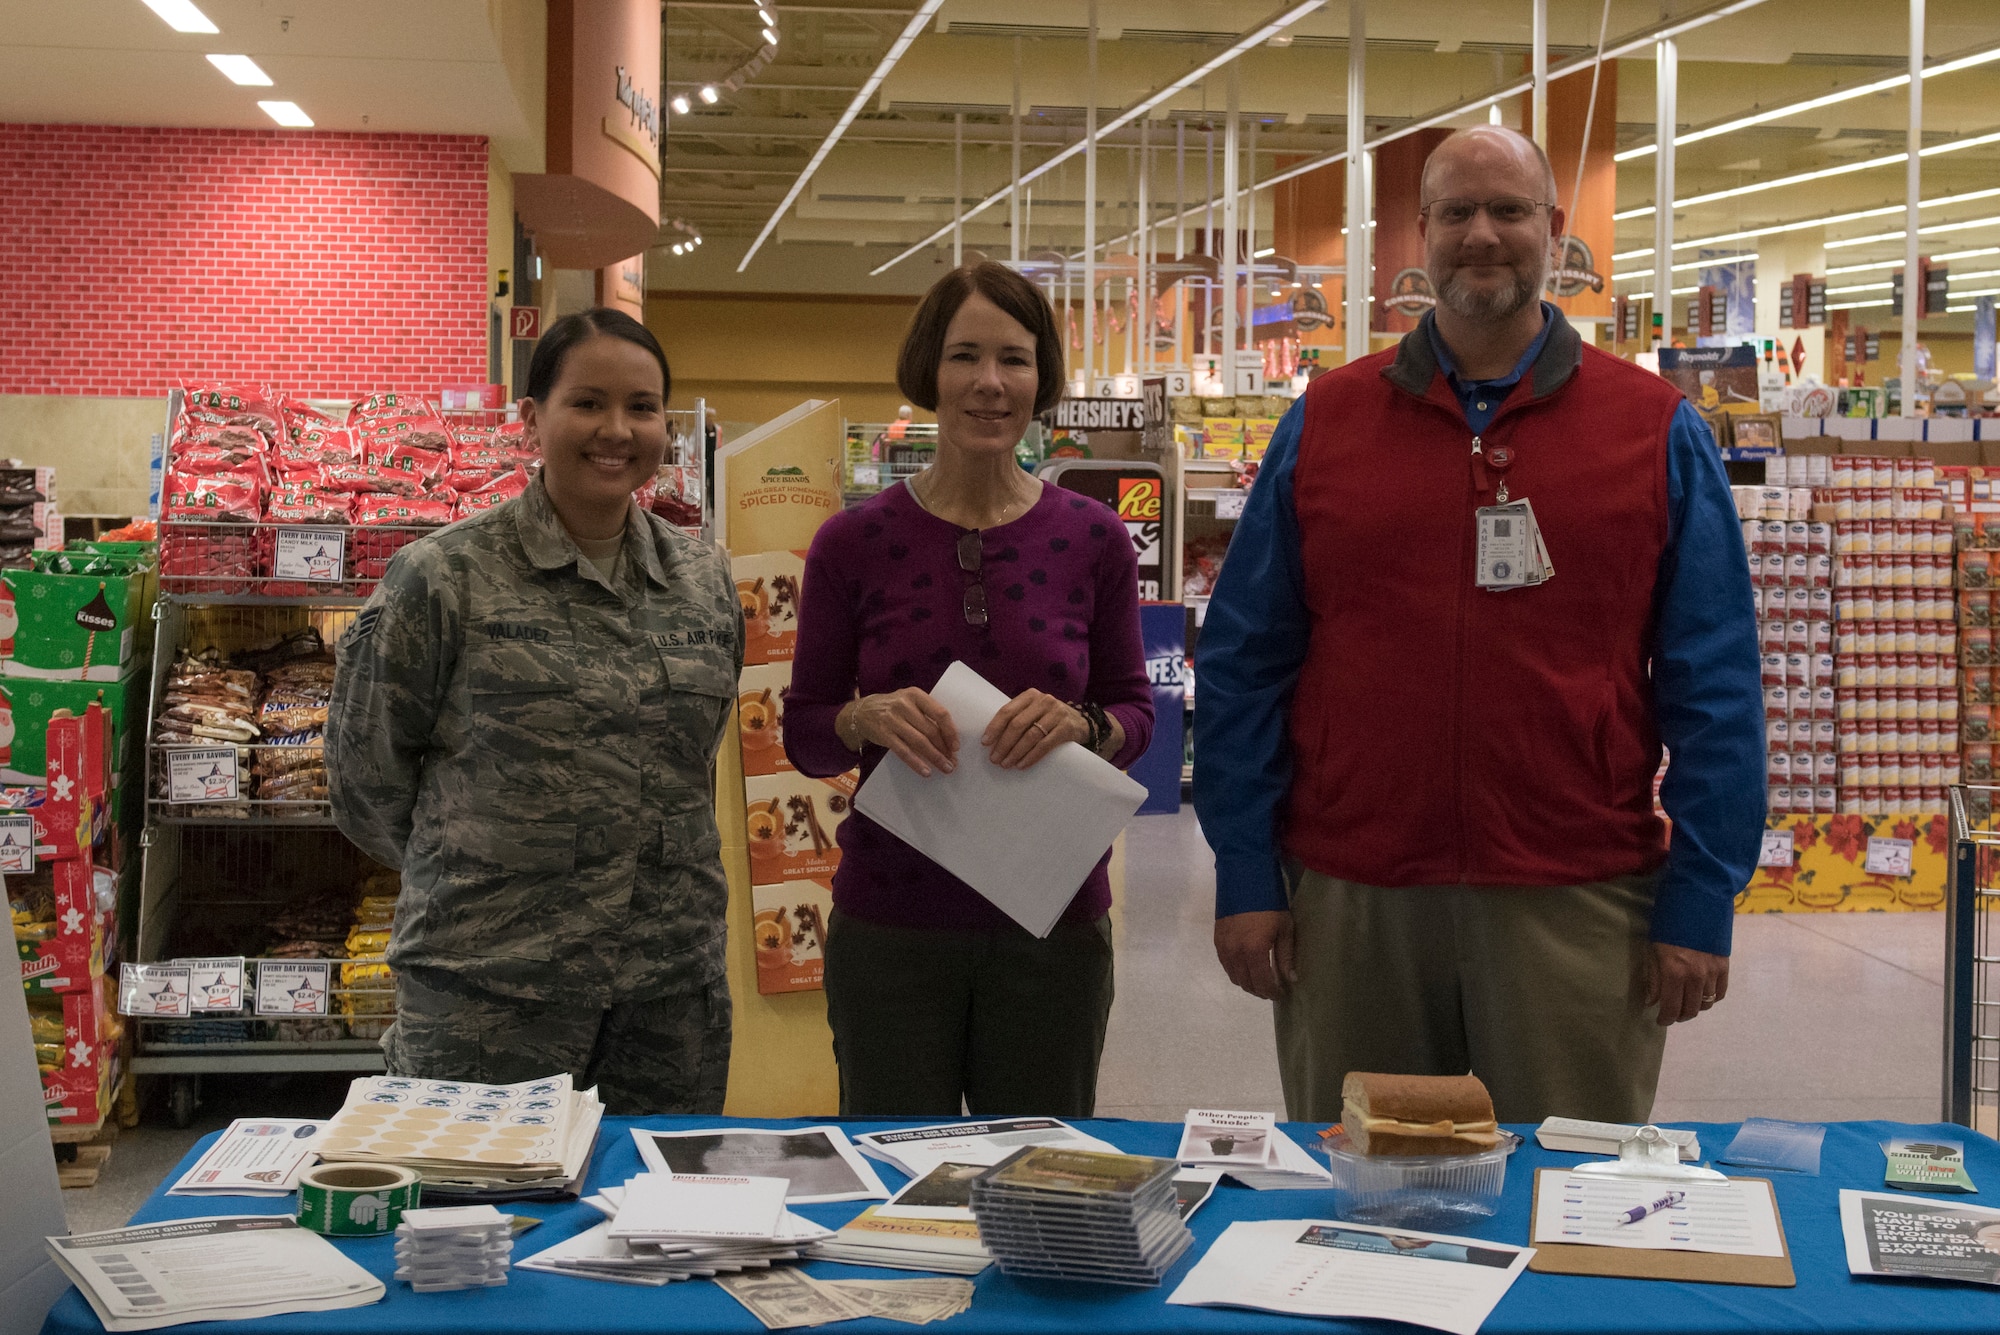 From left, U.S. Air Force Senior Airman Rebecca Valadez 86th Airlift Wing Dental Squadron dental assistant, Charlie Engeman, Health Promotion volunteer, and Brian Kirby, 86th Medical Group Health Promotion coordinator, pose for a photo during the Great American Smokeout event on Ramstein Air Base, Germany, Nov 15, 2018. The event presented an opportunity for smokers to dispose of their tobacco for a free turkey sandwich and pledge to quit smoking. (U.S. Air Force photo by Airman 1st Class Kaylea Berry)